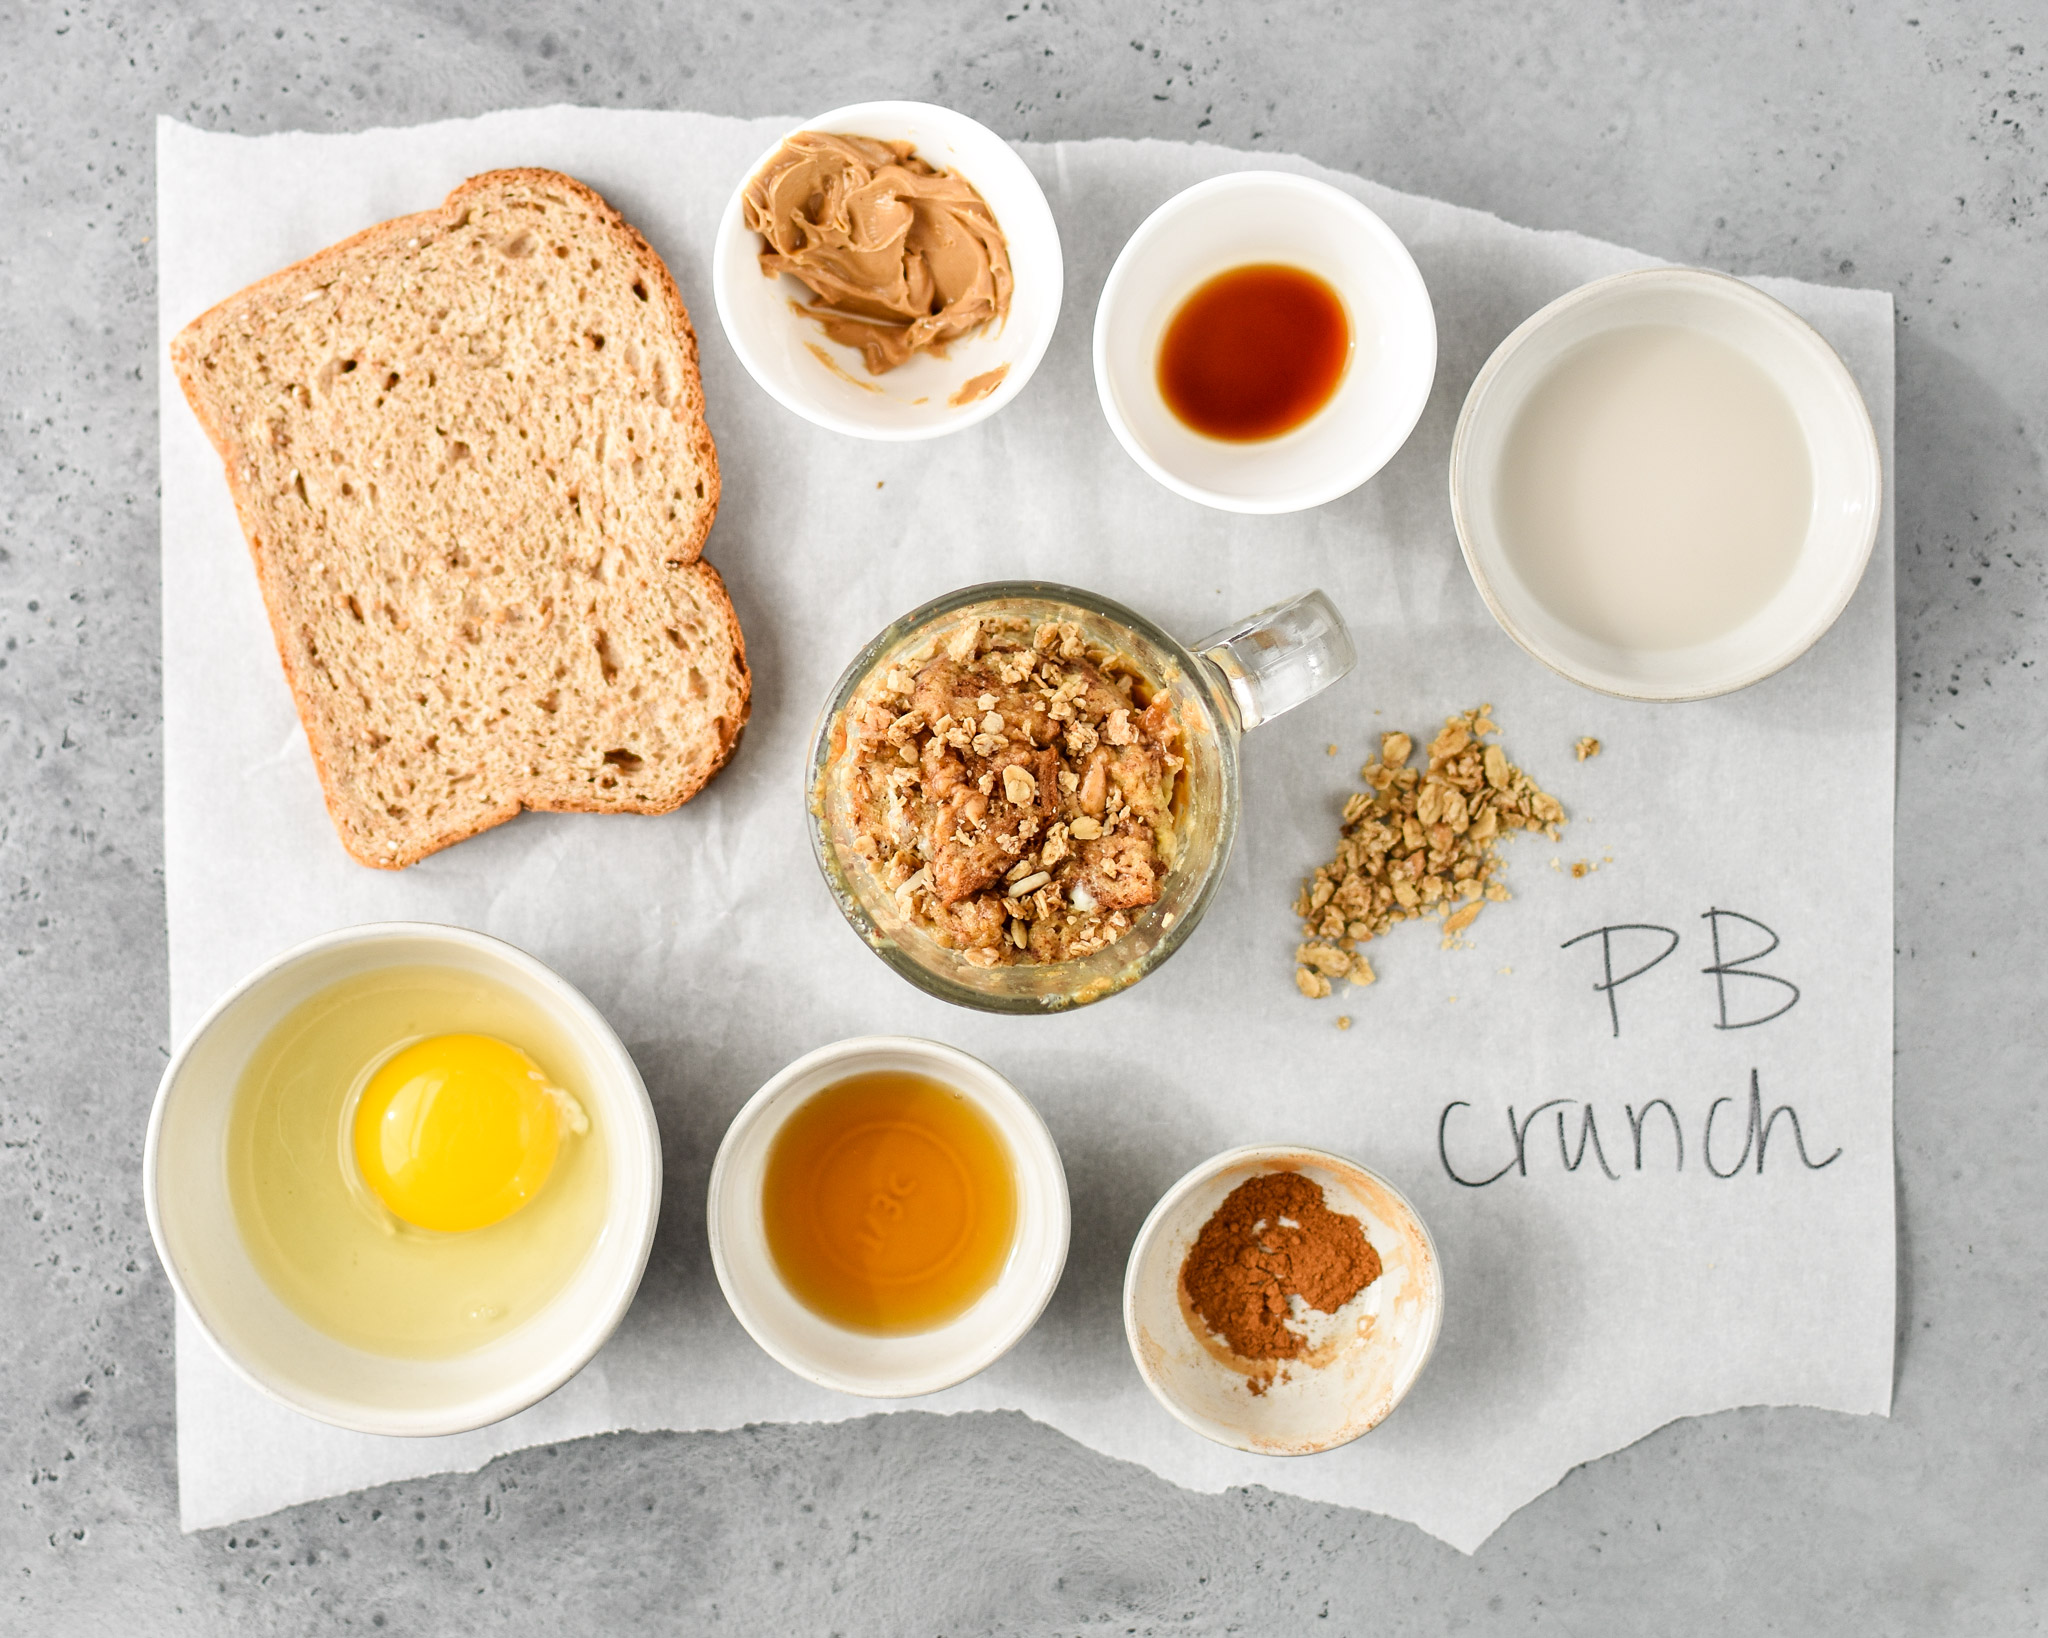 ingredients for PB crunch microwave mug french toast